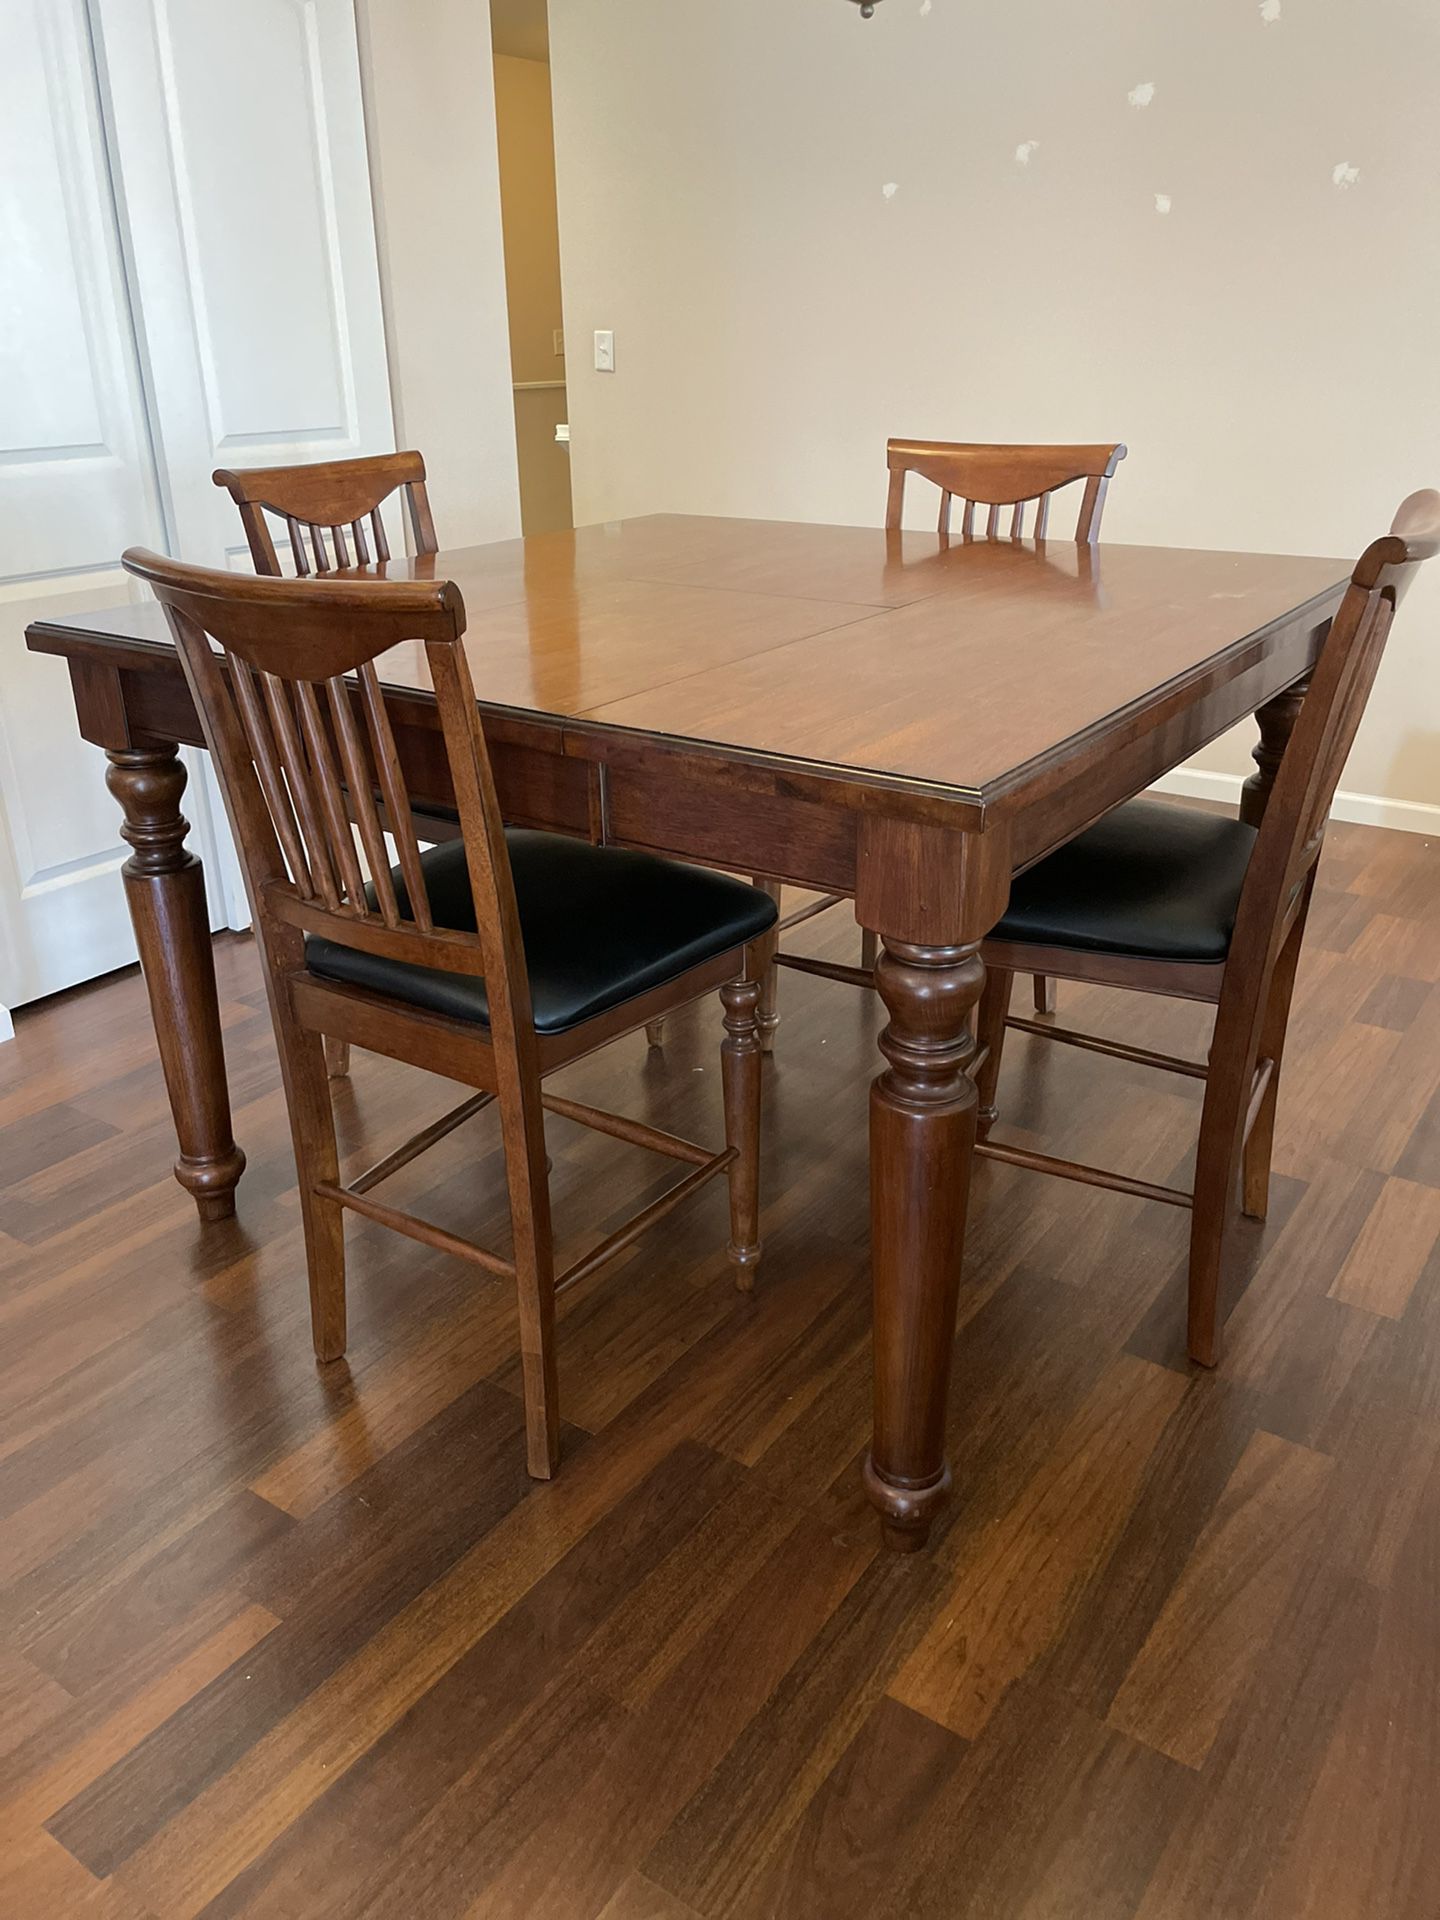 High top table with leaf insert Plus 6 Chairs